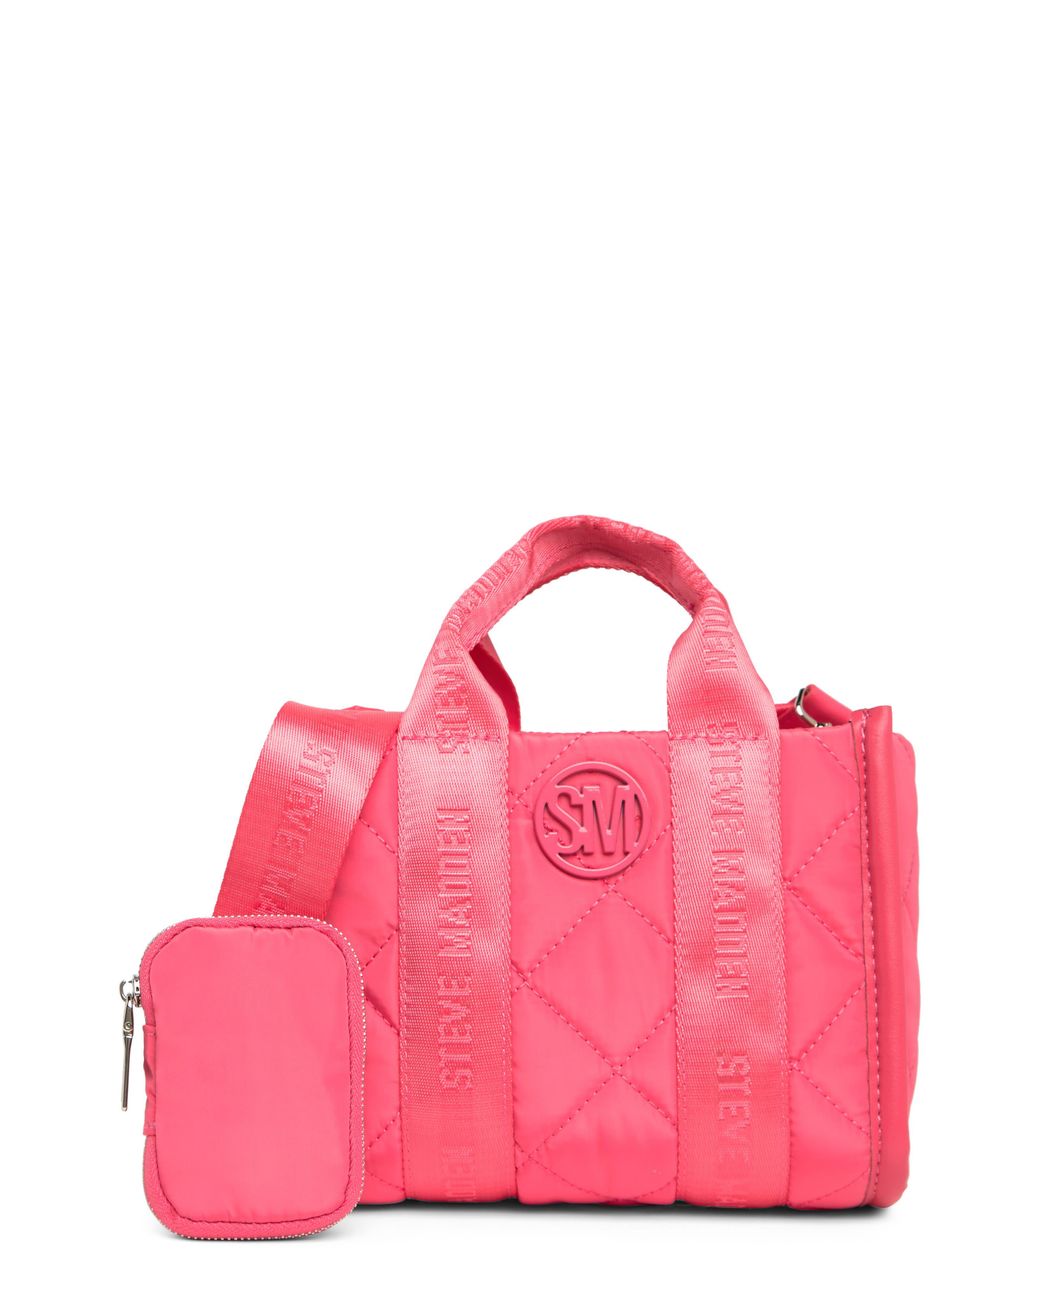 Steve Madden Minnie Nylon Crossbody Bag In Coral At Nordstrom Rack in Pink  | Lyst